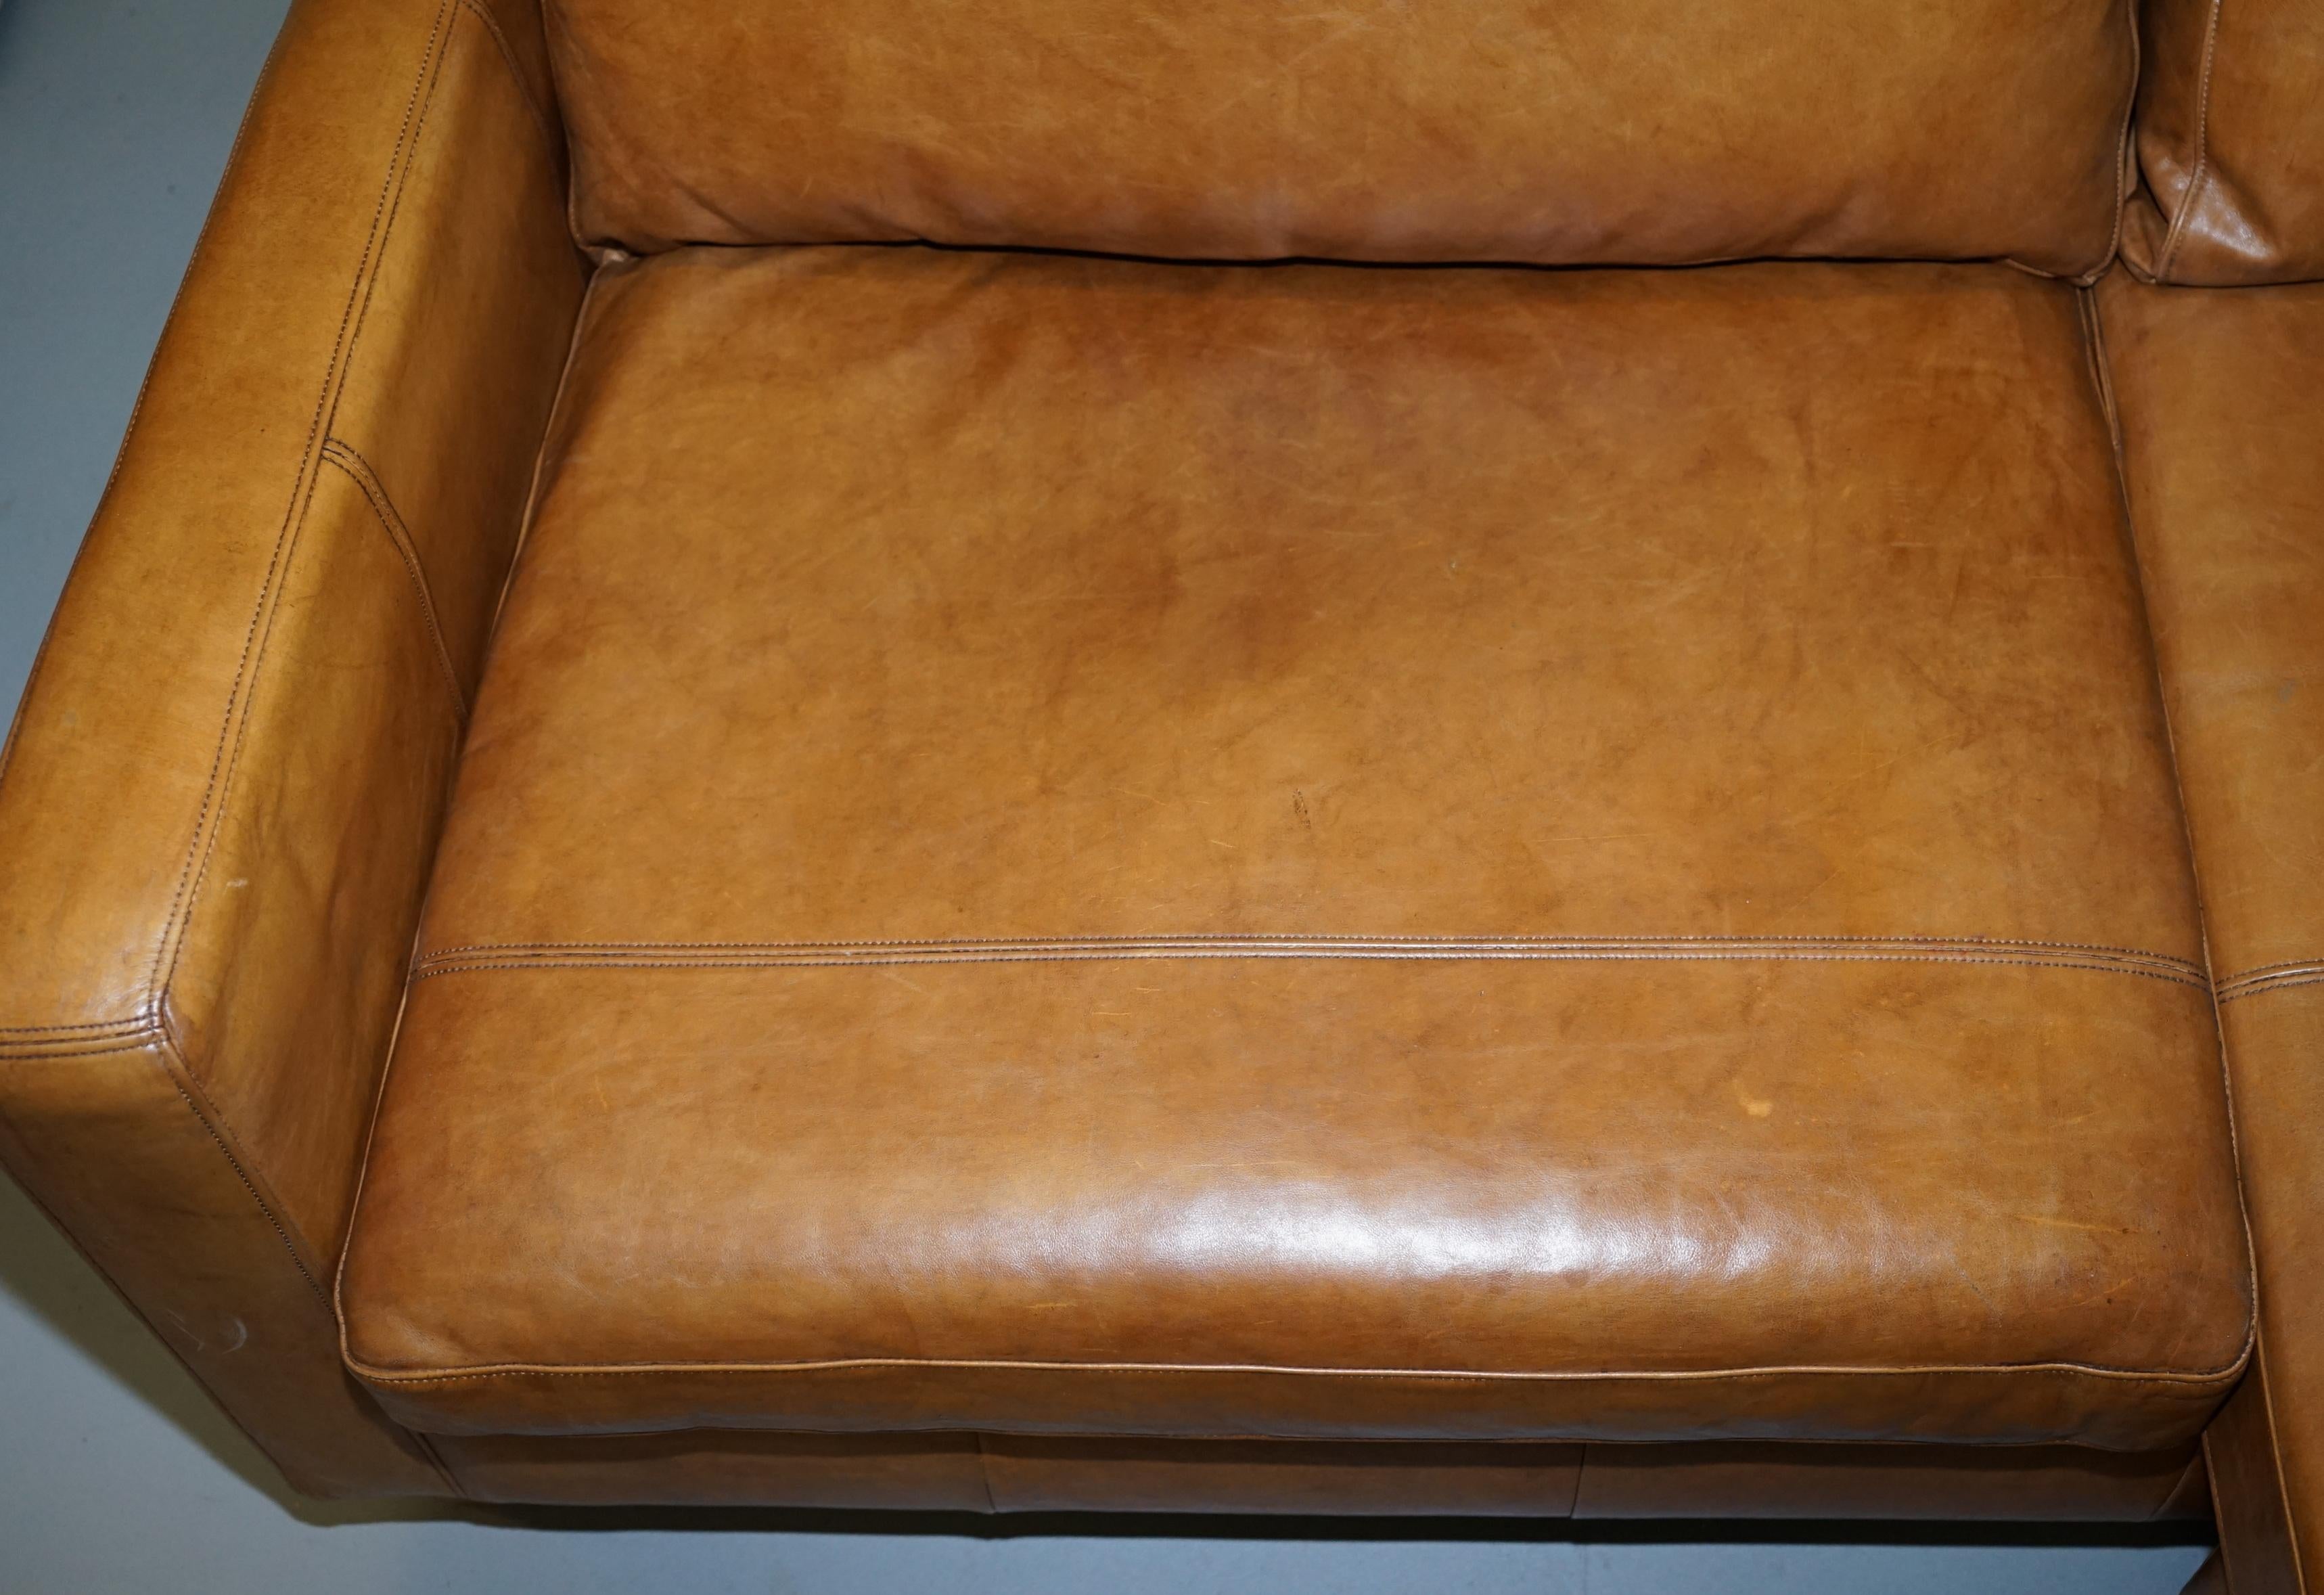 English Tan Leather Corner 2-Seat Sofa or Sofa Chaise Changeable Footstool Swap Sides